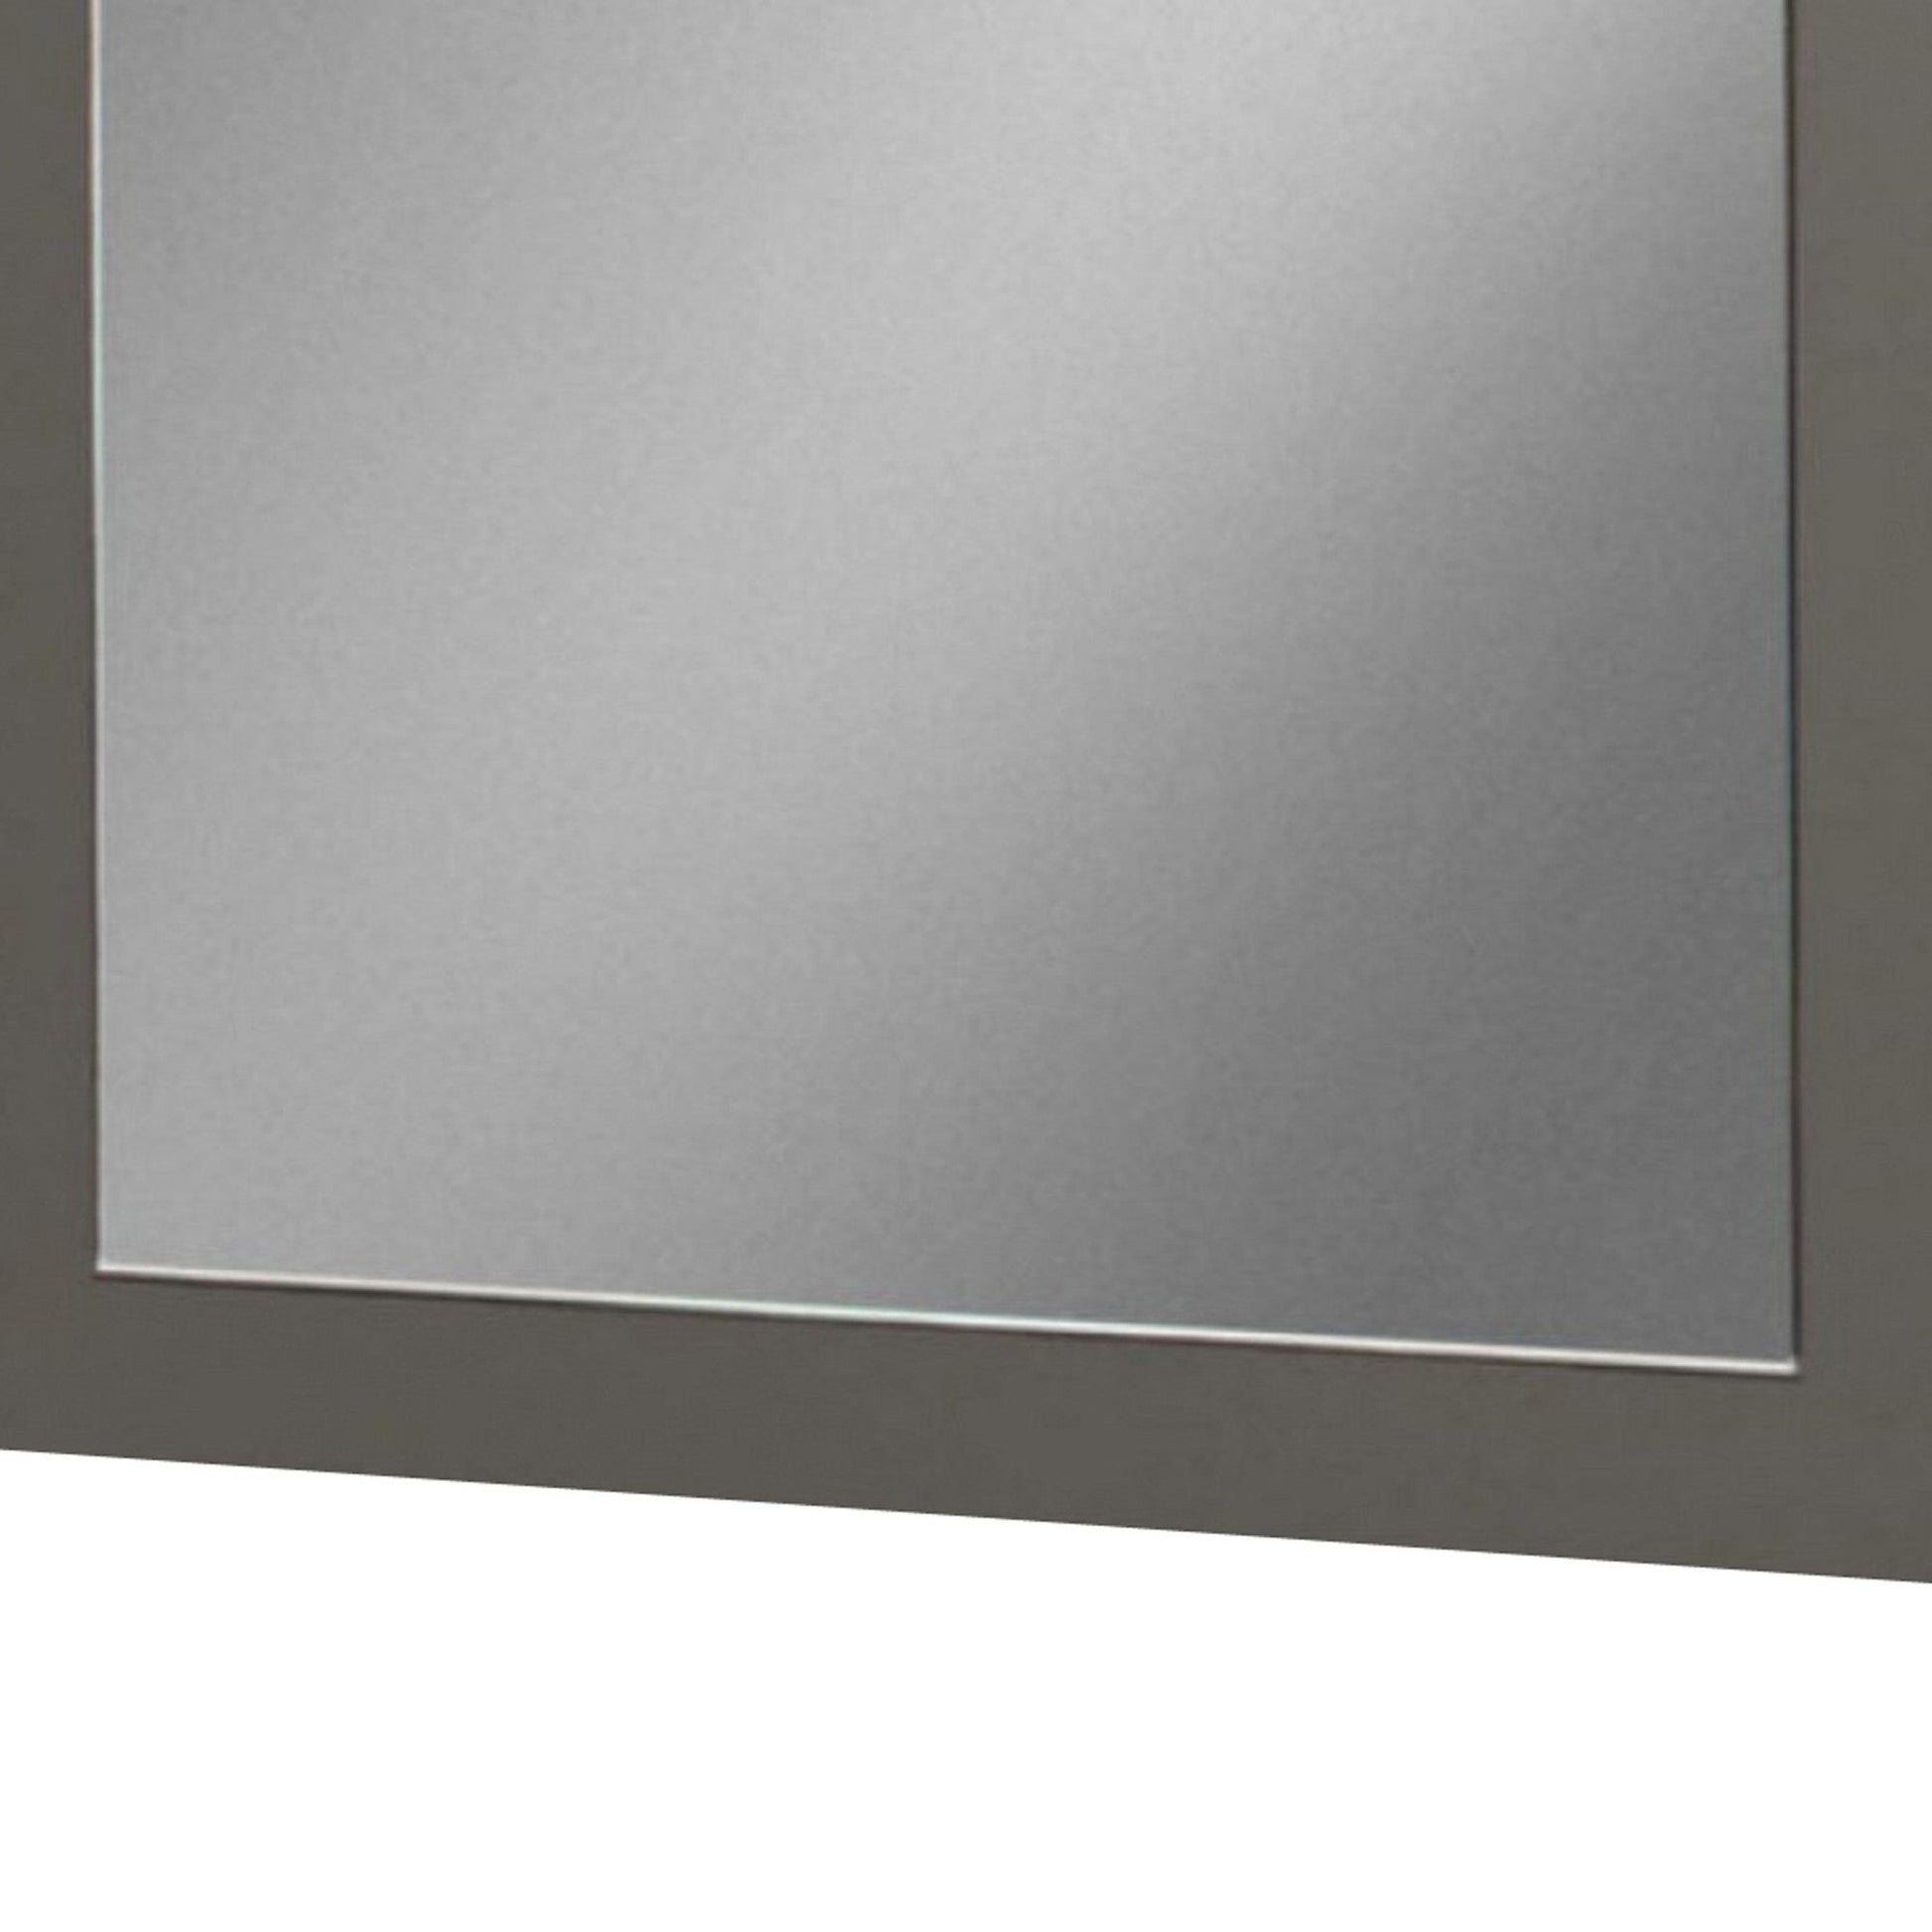 Benzara Gray and Silver Rectangular Wall Mirror With Wooden Frame